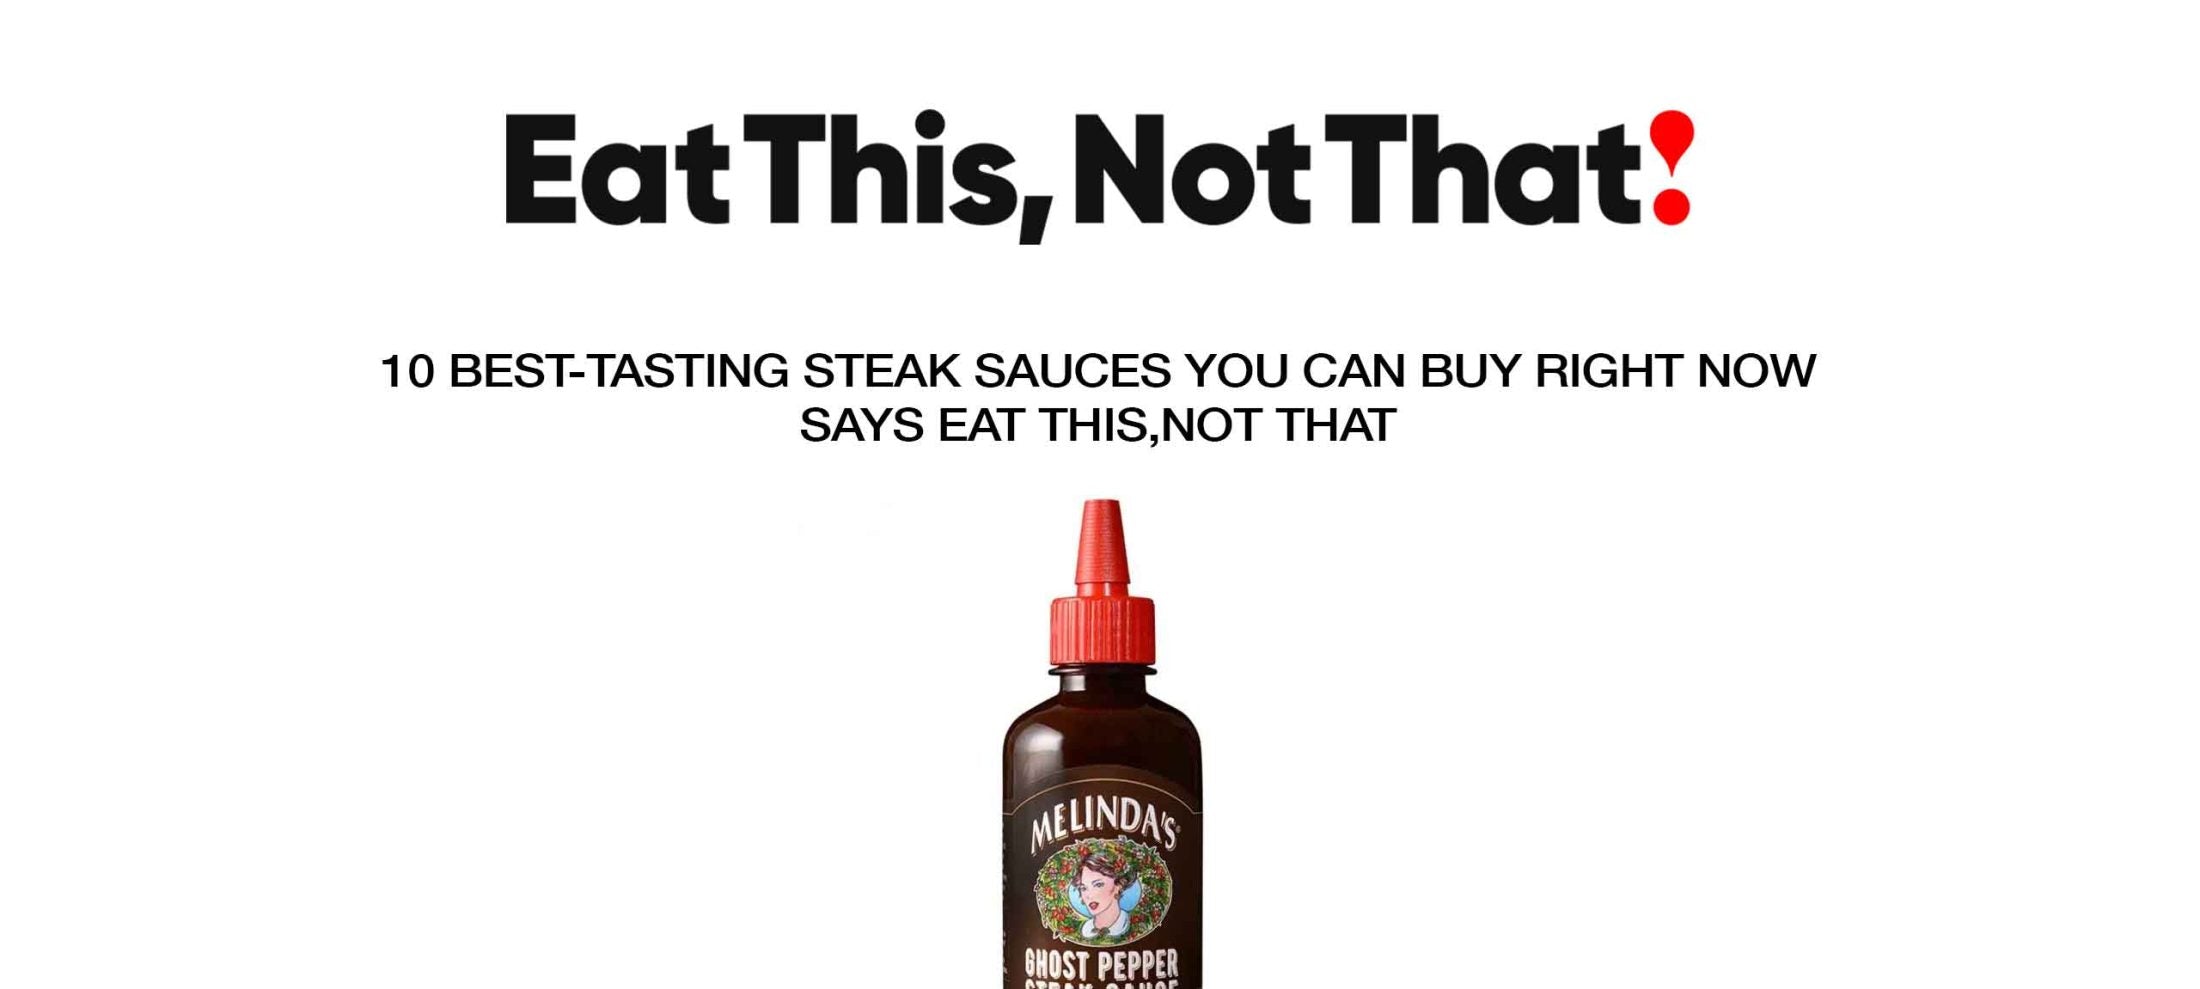 10 Best-Tasting Steak Sauces You Can Buy Right Now | Says EatThis,NotThat